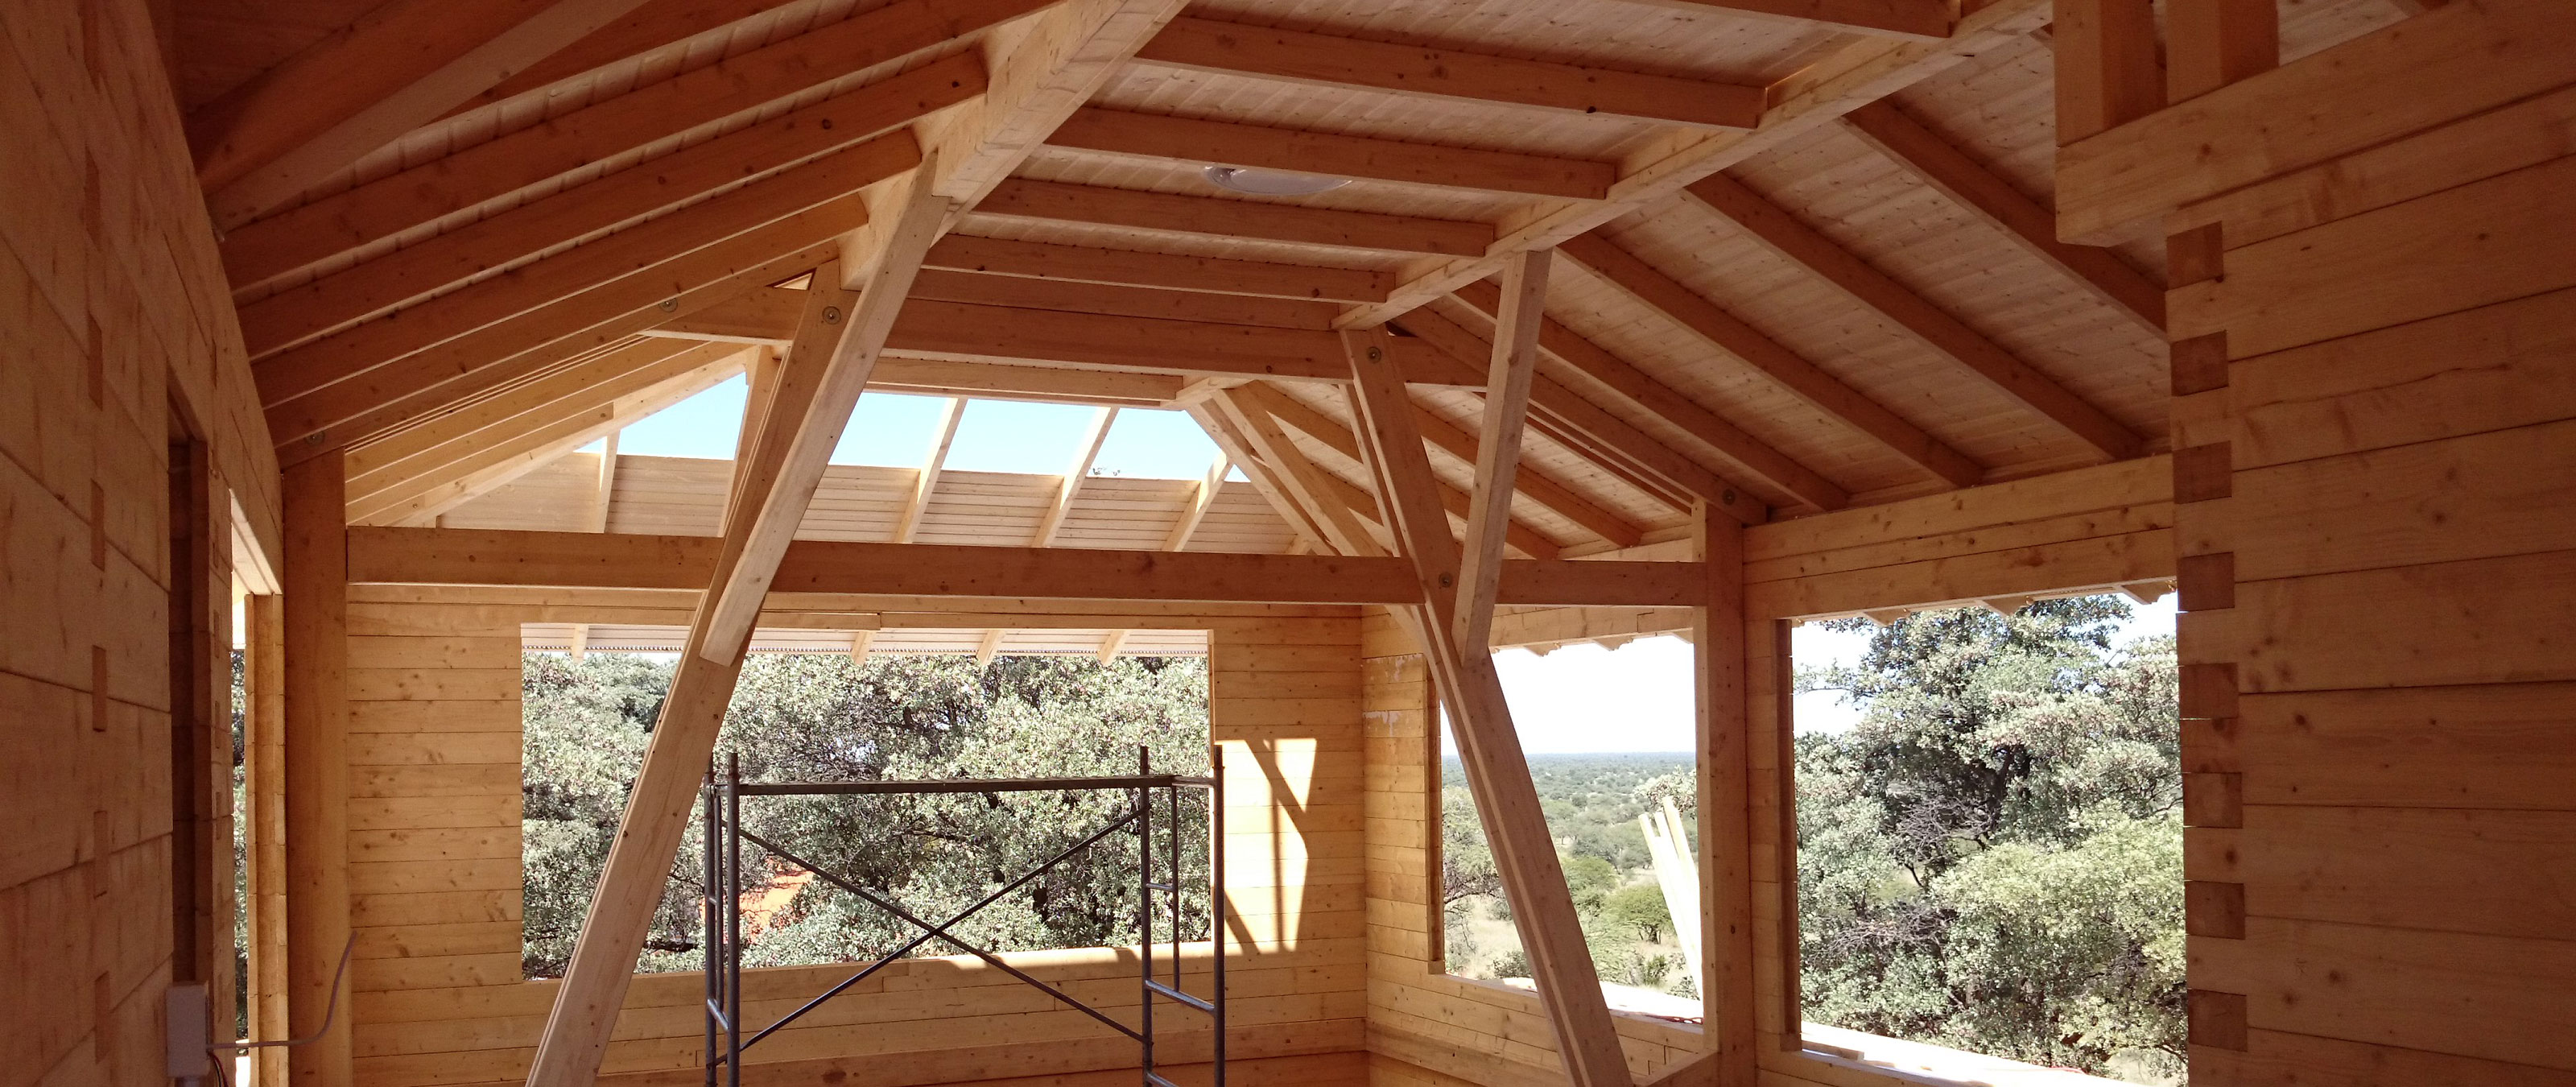 WEINMANN timber framing, woodworking machines, prefab homes, joinery machines